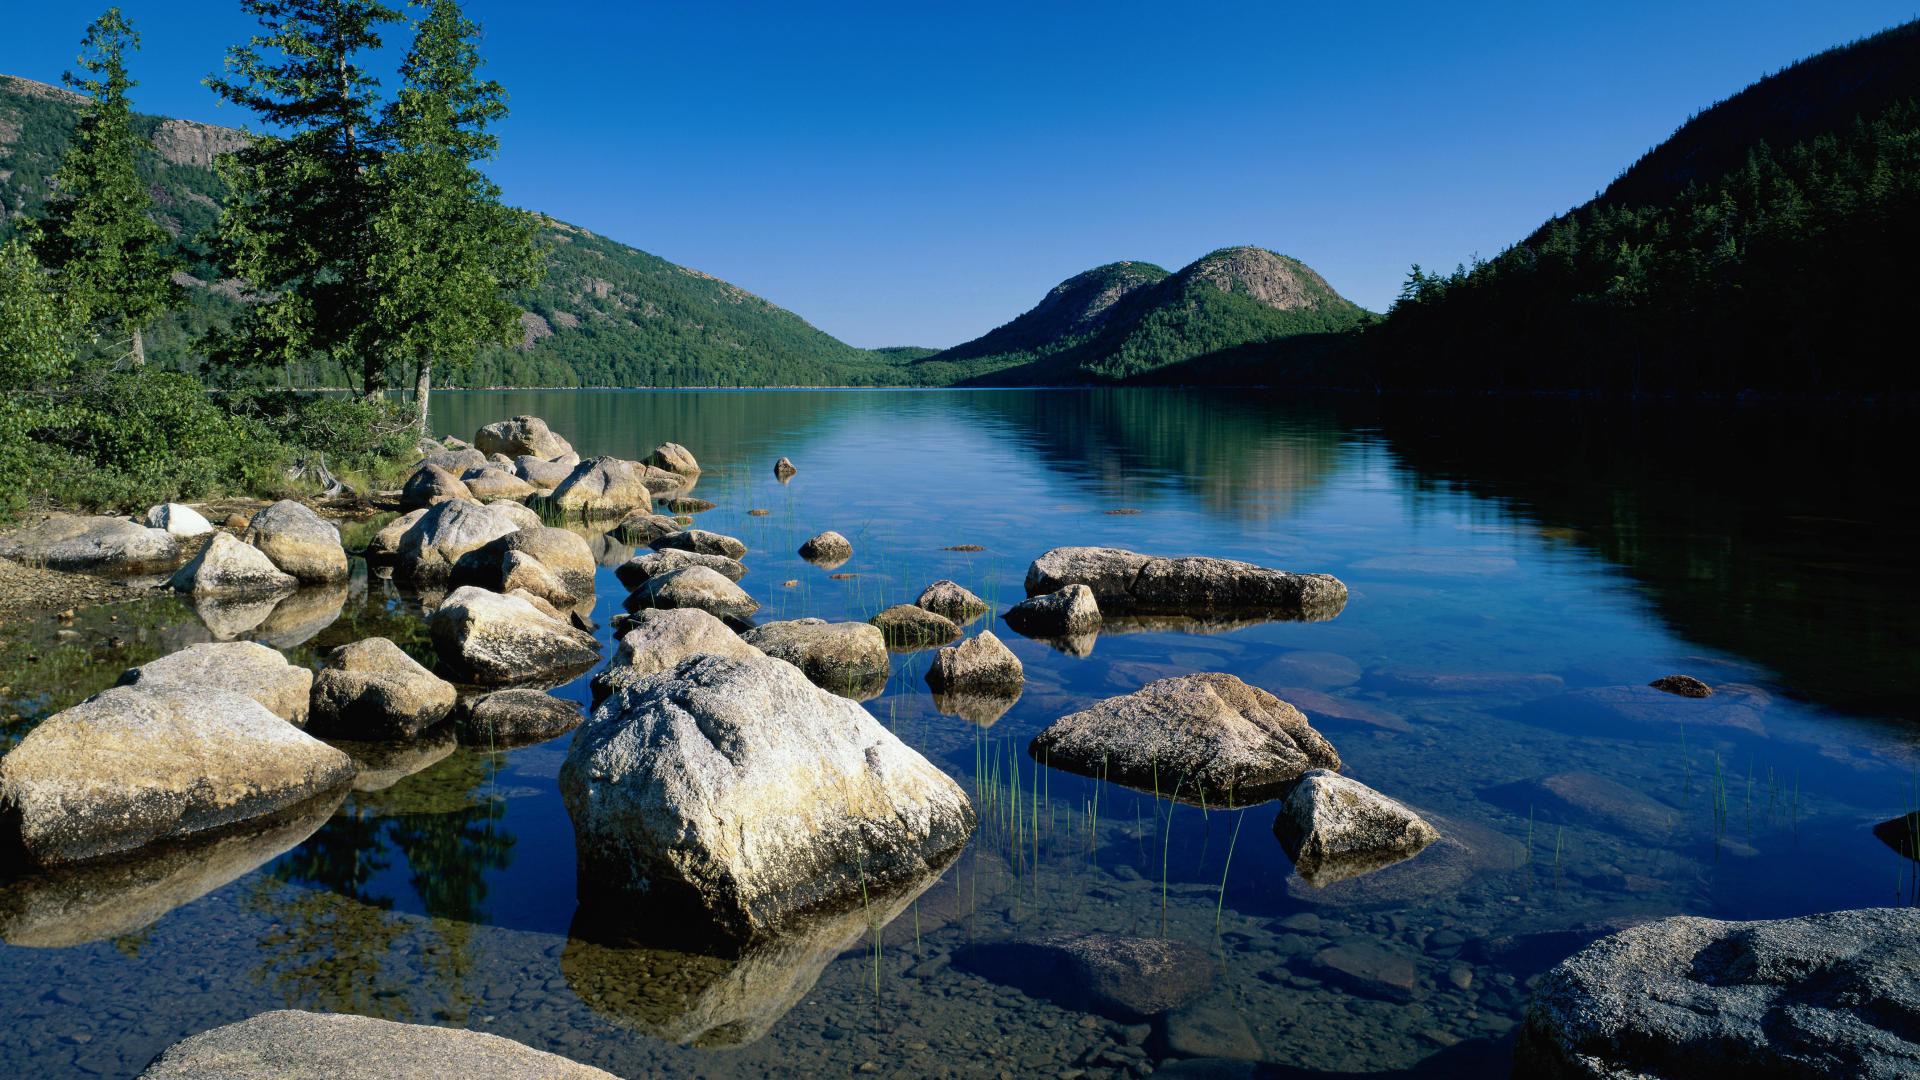 1920x1080 Download Background - Jordan Pond, Acadia National Park, Maine - Free Cool  Backgrounds and Wallpapers for your Desktop Or Laptop.